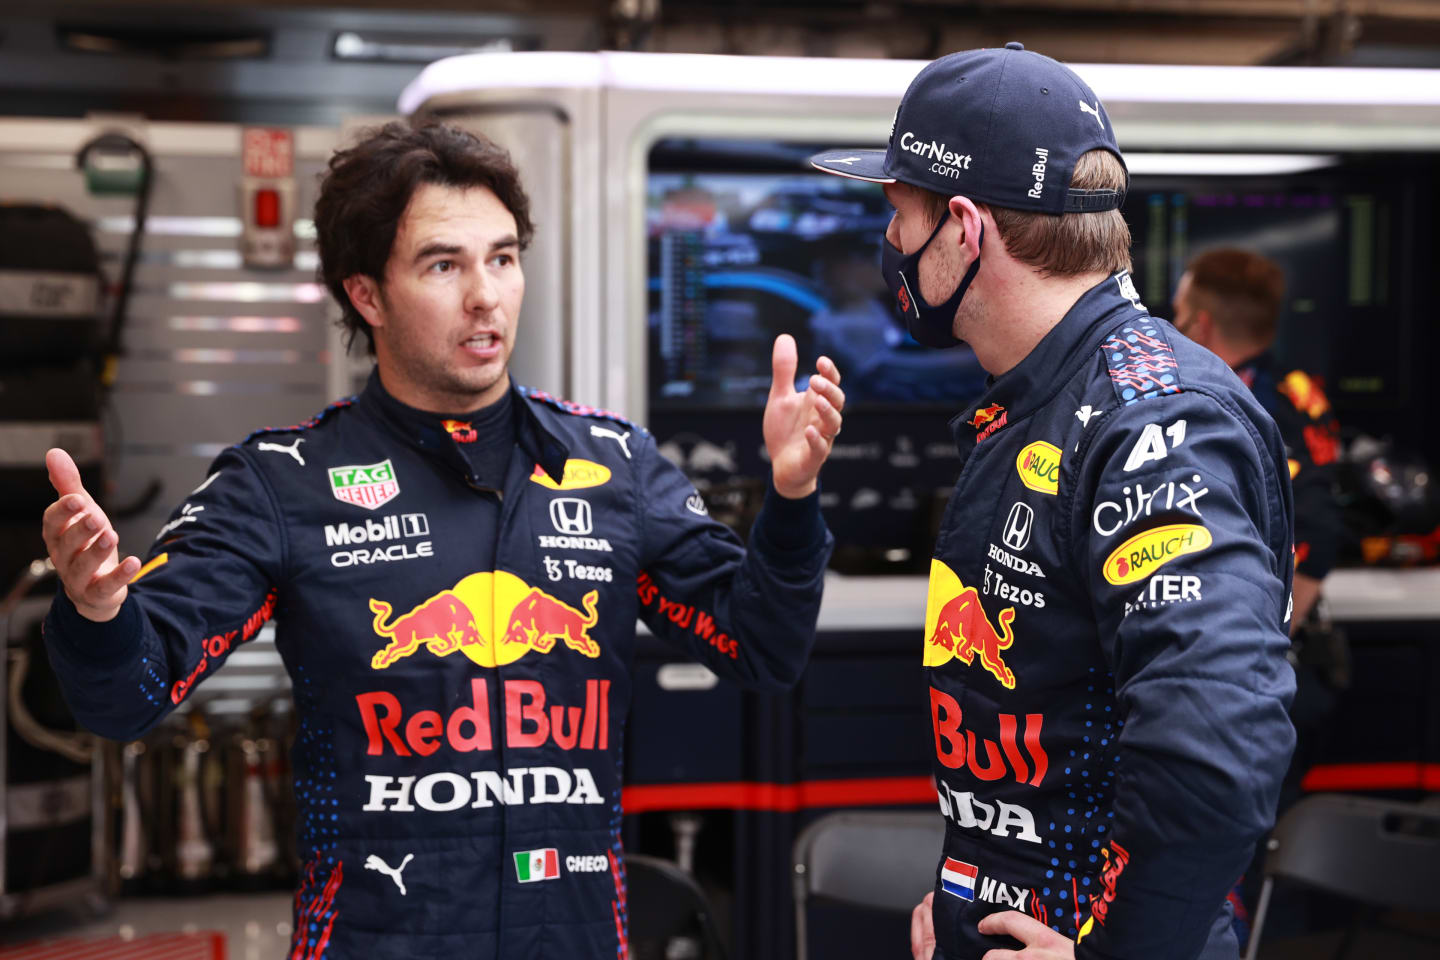 BUDAPEST, HUNGARY - AUGUST 01: Max Verstappen of Netherlands and Red Bull Racing and Sergio Perez of Mexico and Red Bull Racing talk in the garage during the red flag delay during the F1 Grand Prix of Hungary at Hungaroring on August 01, 2021 in Budapest, Hungary. (Photo by Mark Thompson/Getty Images)